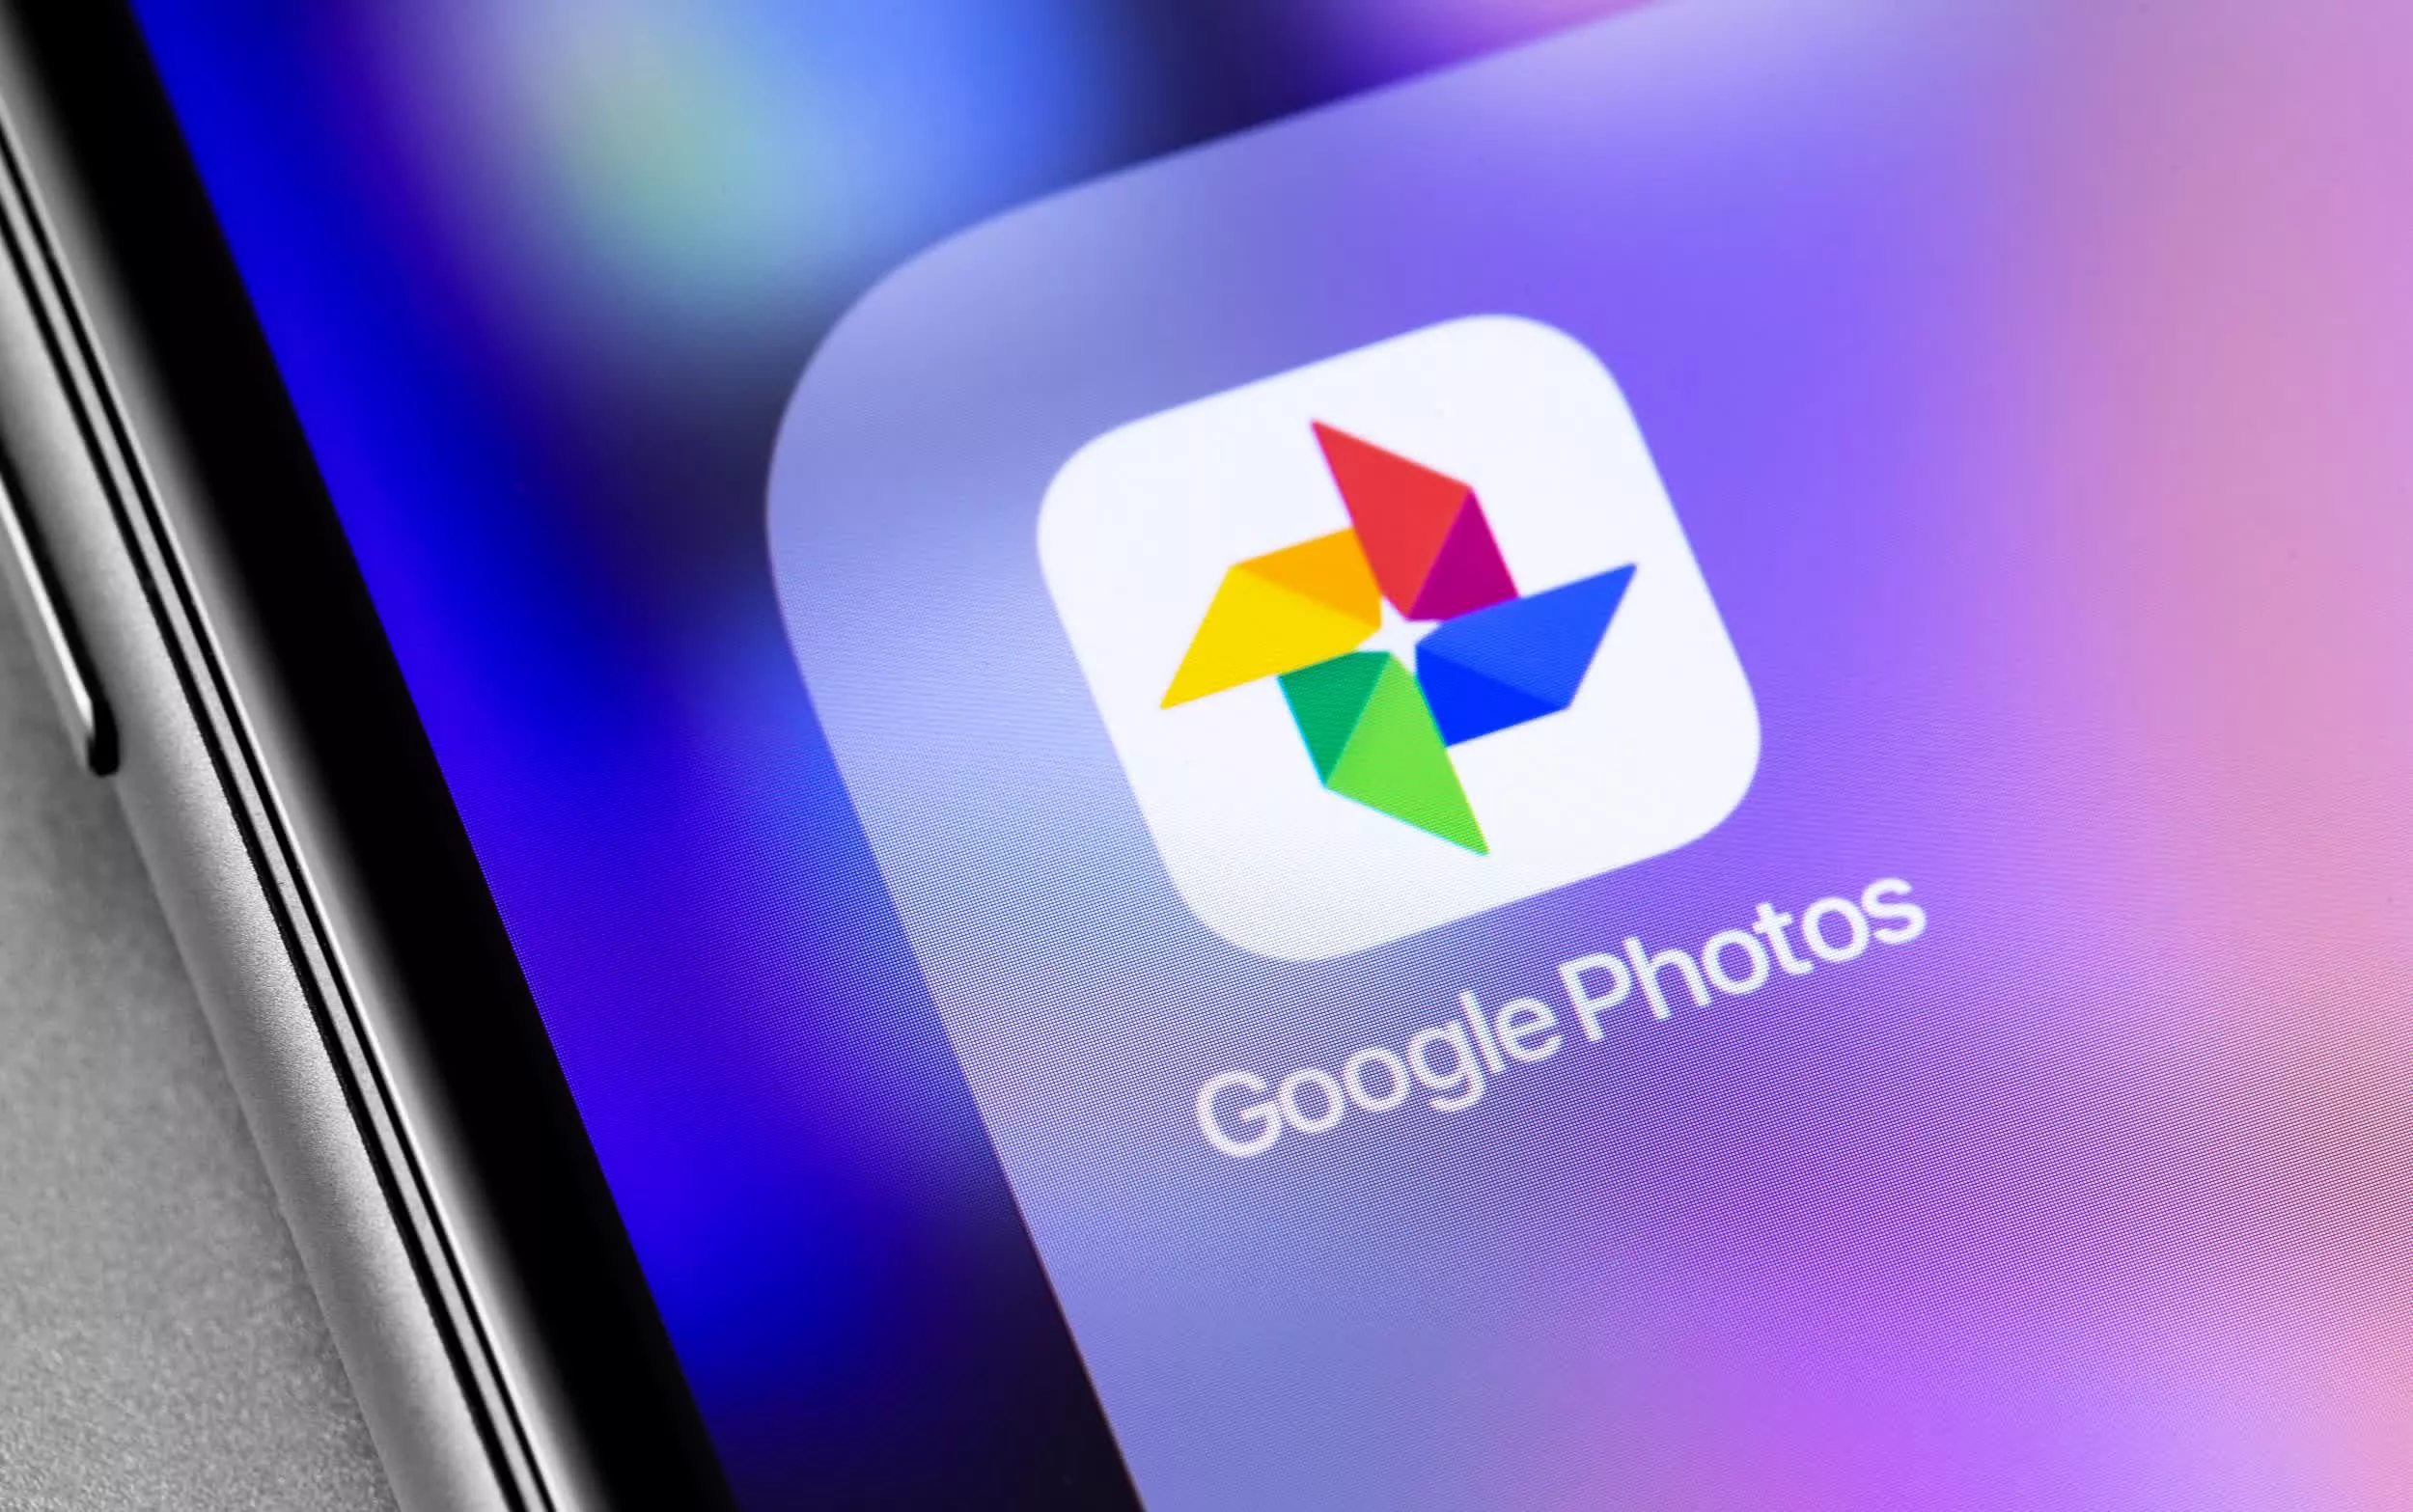 you-can-move-your-entire-google-photos-library-to-icloud-with-a-few-clicks-using-this-new-tool-[techspot]